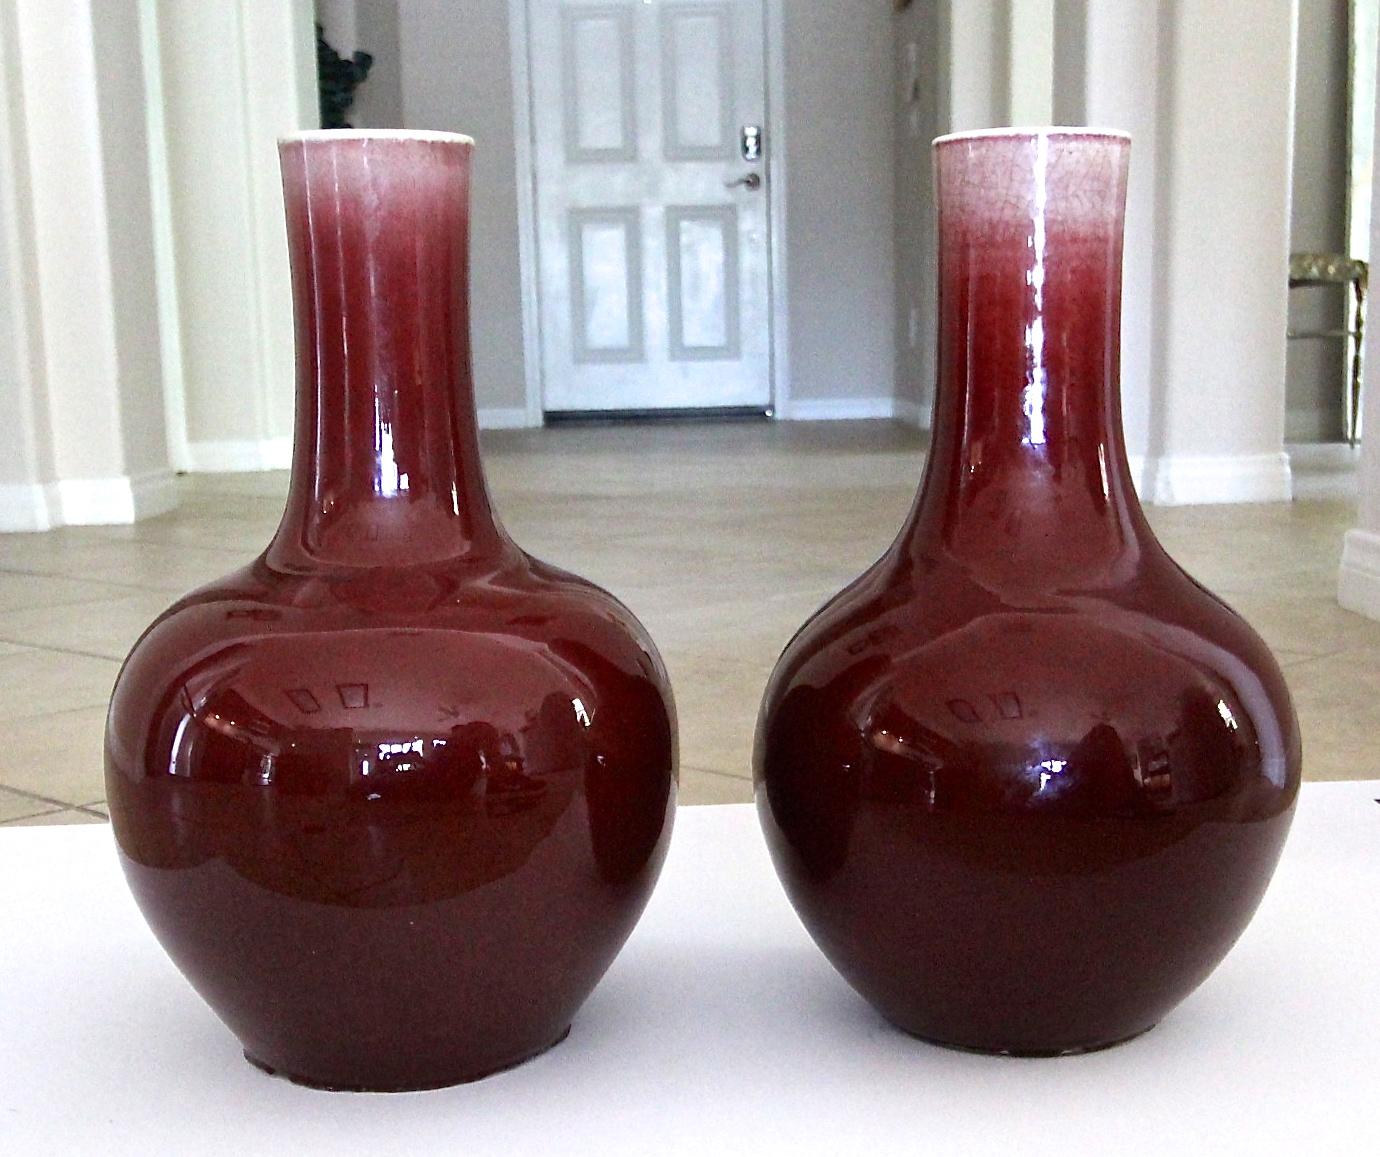 Pair of (two) large late 19th century (possibly earlier) ‘sang de boeuf’ or oxblood glazed porcelain Chinese vases. The vases are globular form surmounted by a slender neck with soft crackled glaze throughout. Later hole drilled in each and used as